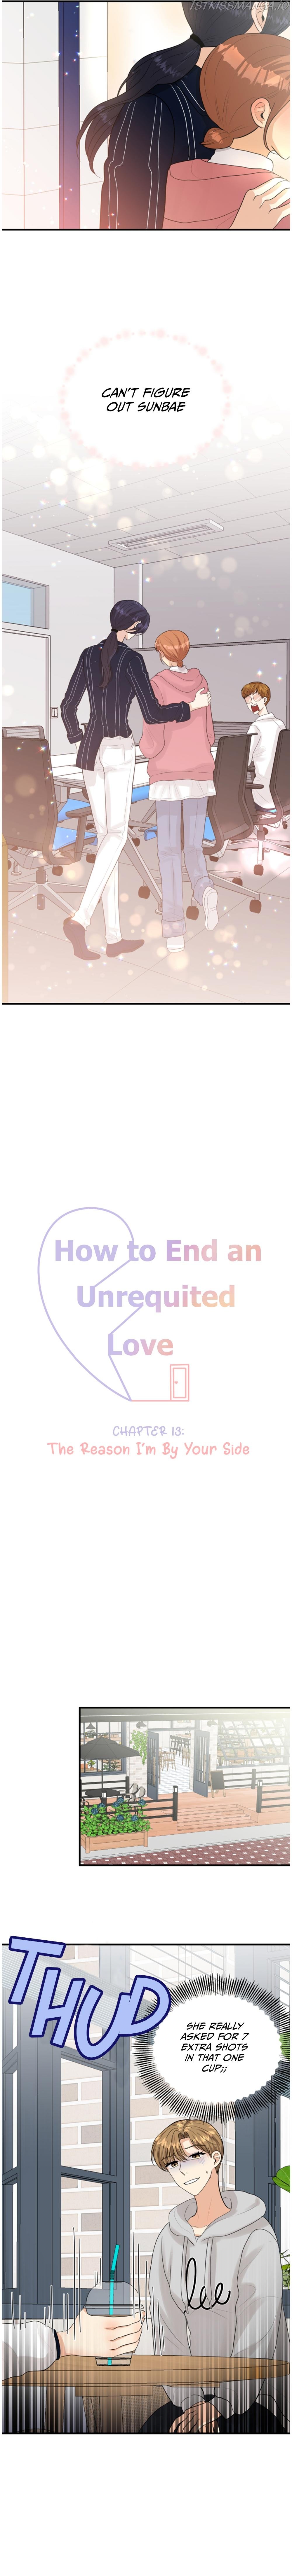 How to End an Unrequited Love chapter 13